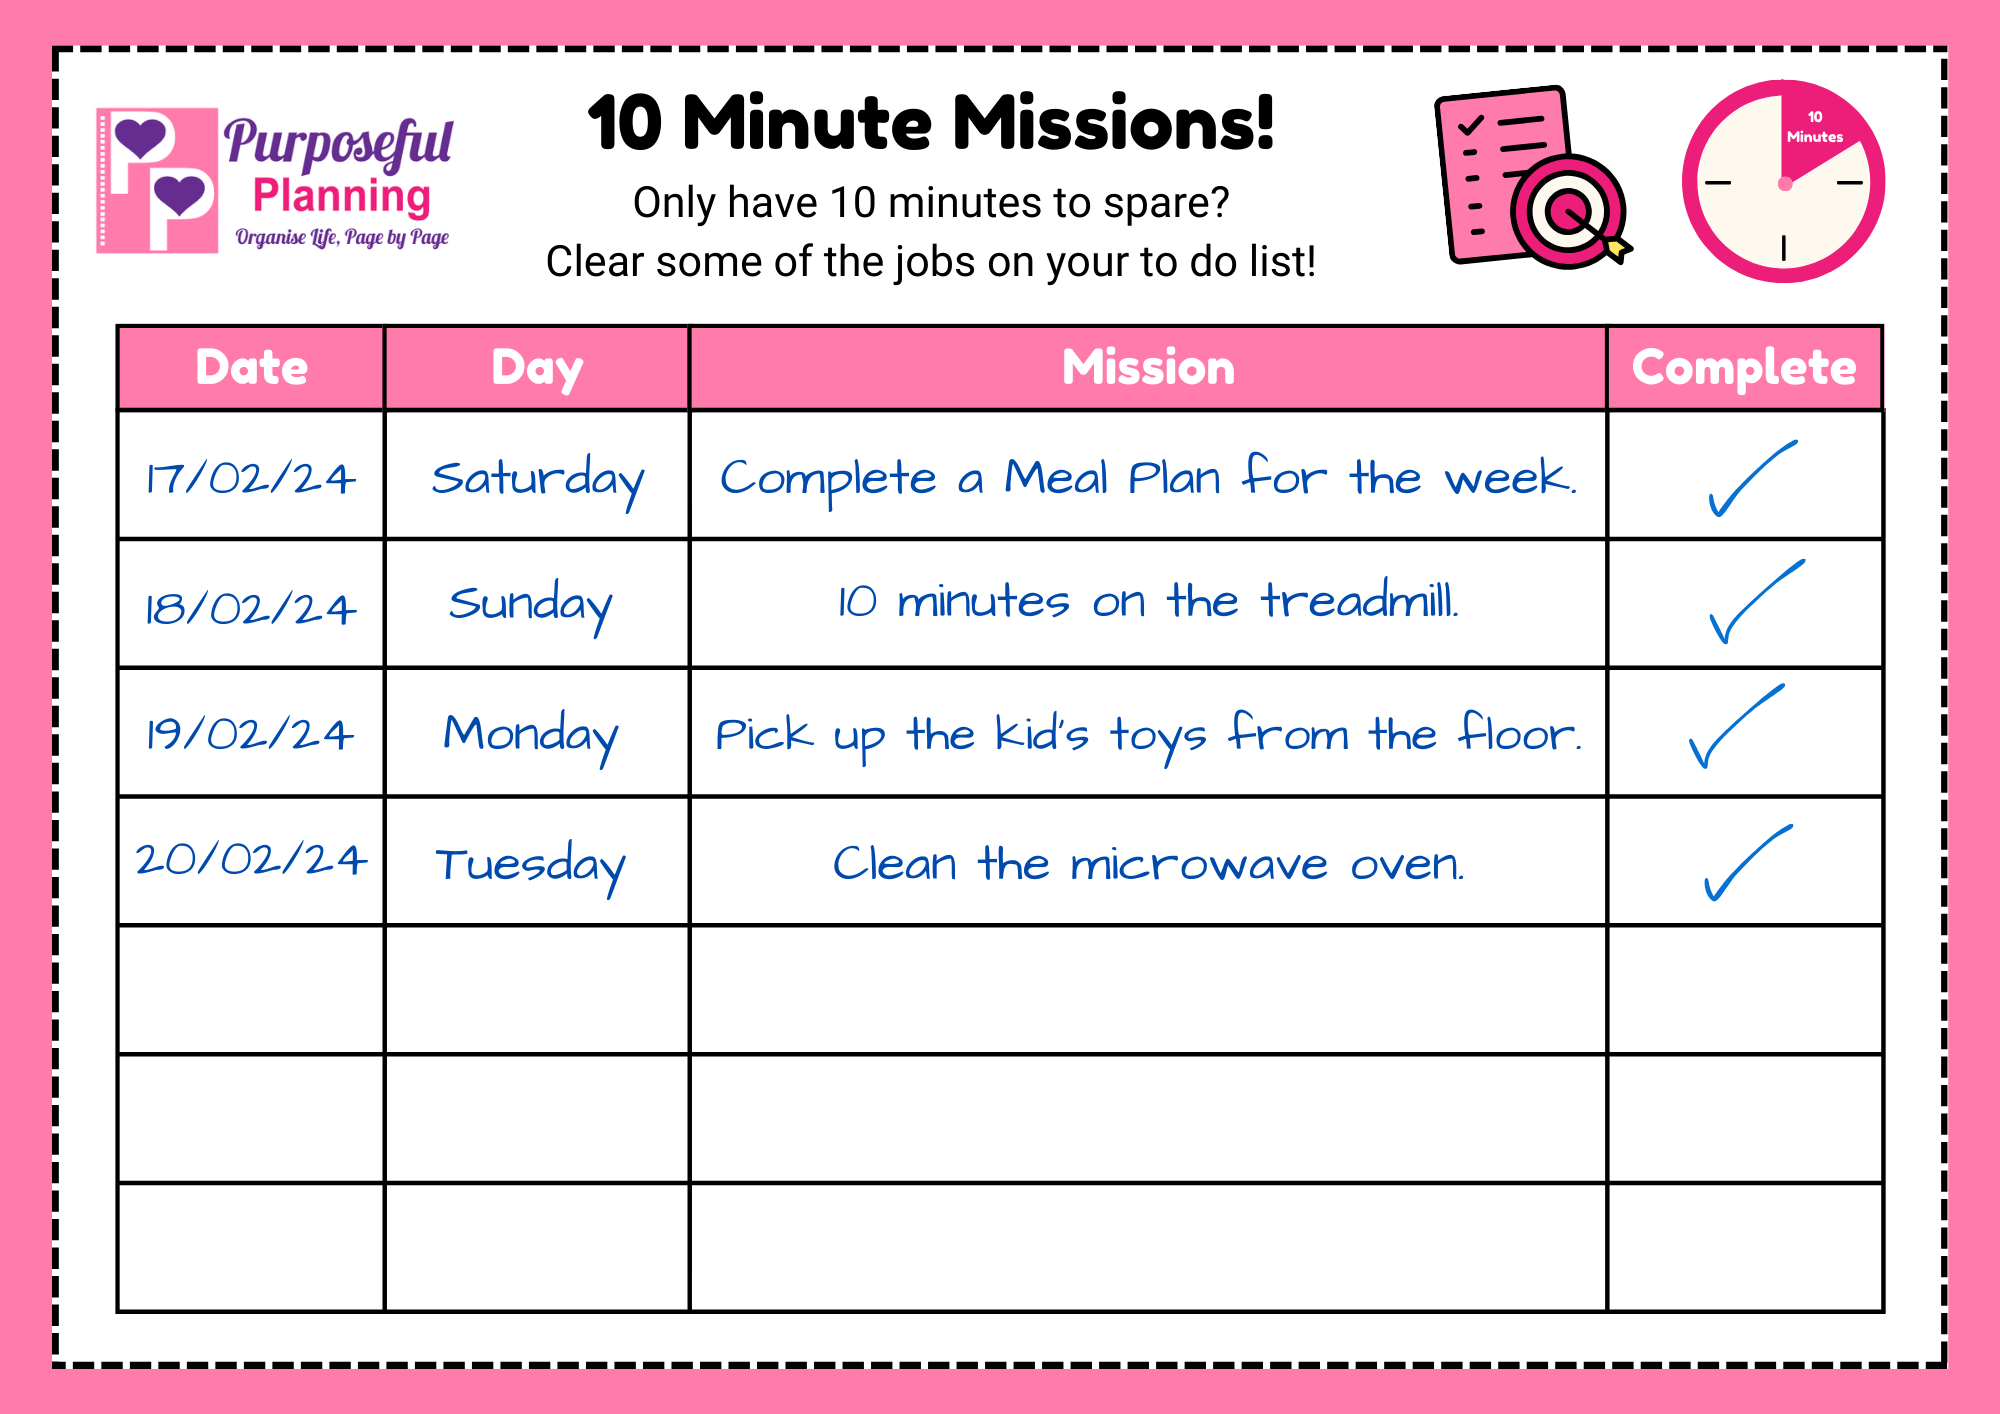 Example- Purposeful Planning's 10 Minute Missions! Free Printable